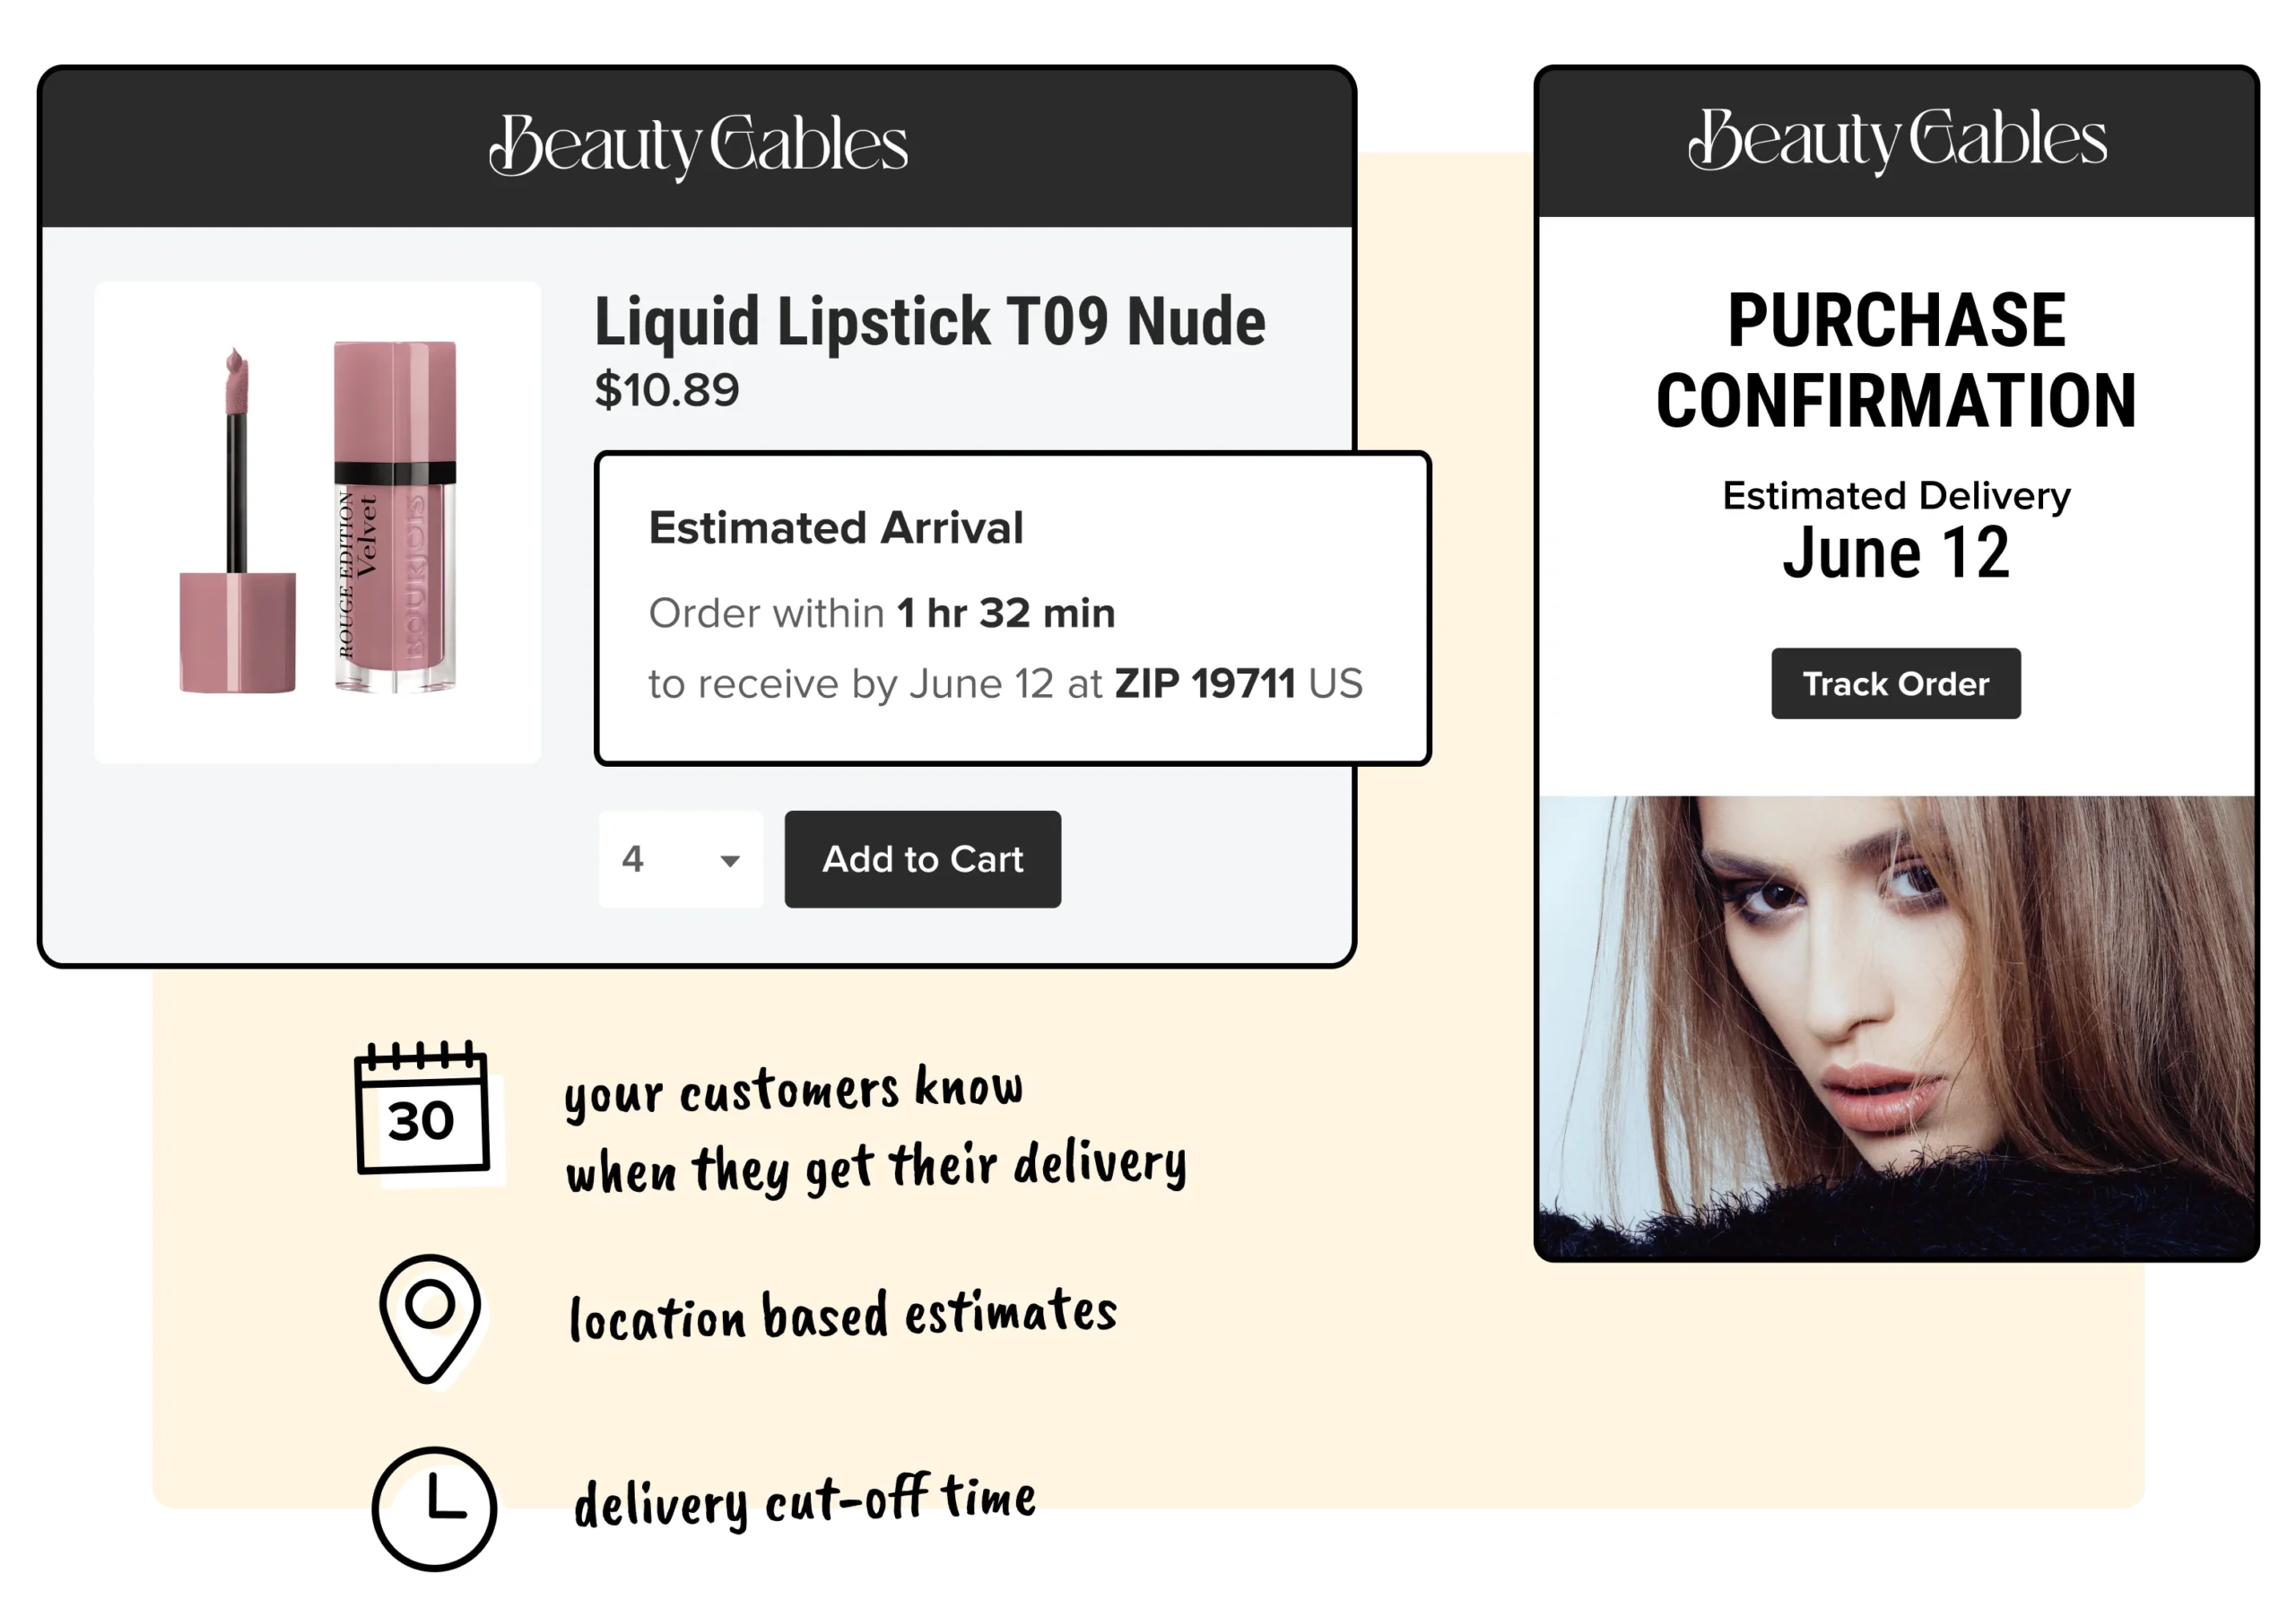 WeSupply Estimated Delivery Date + proactive Notifications - beauty gables